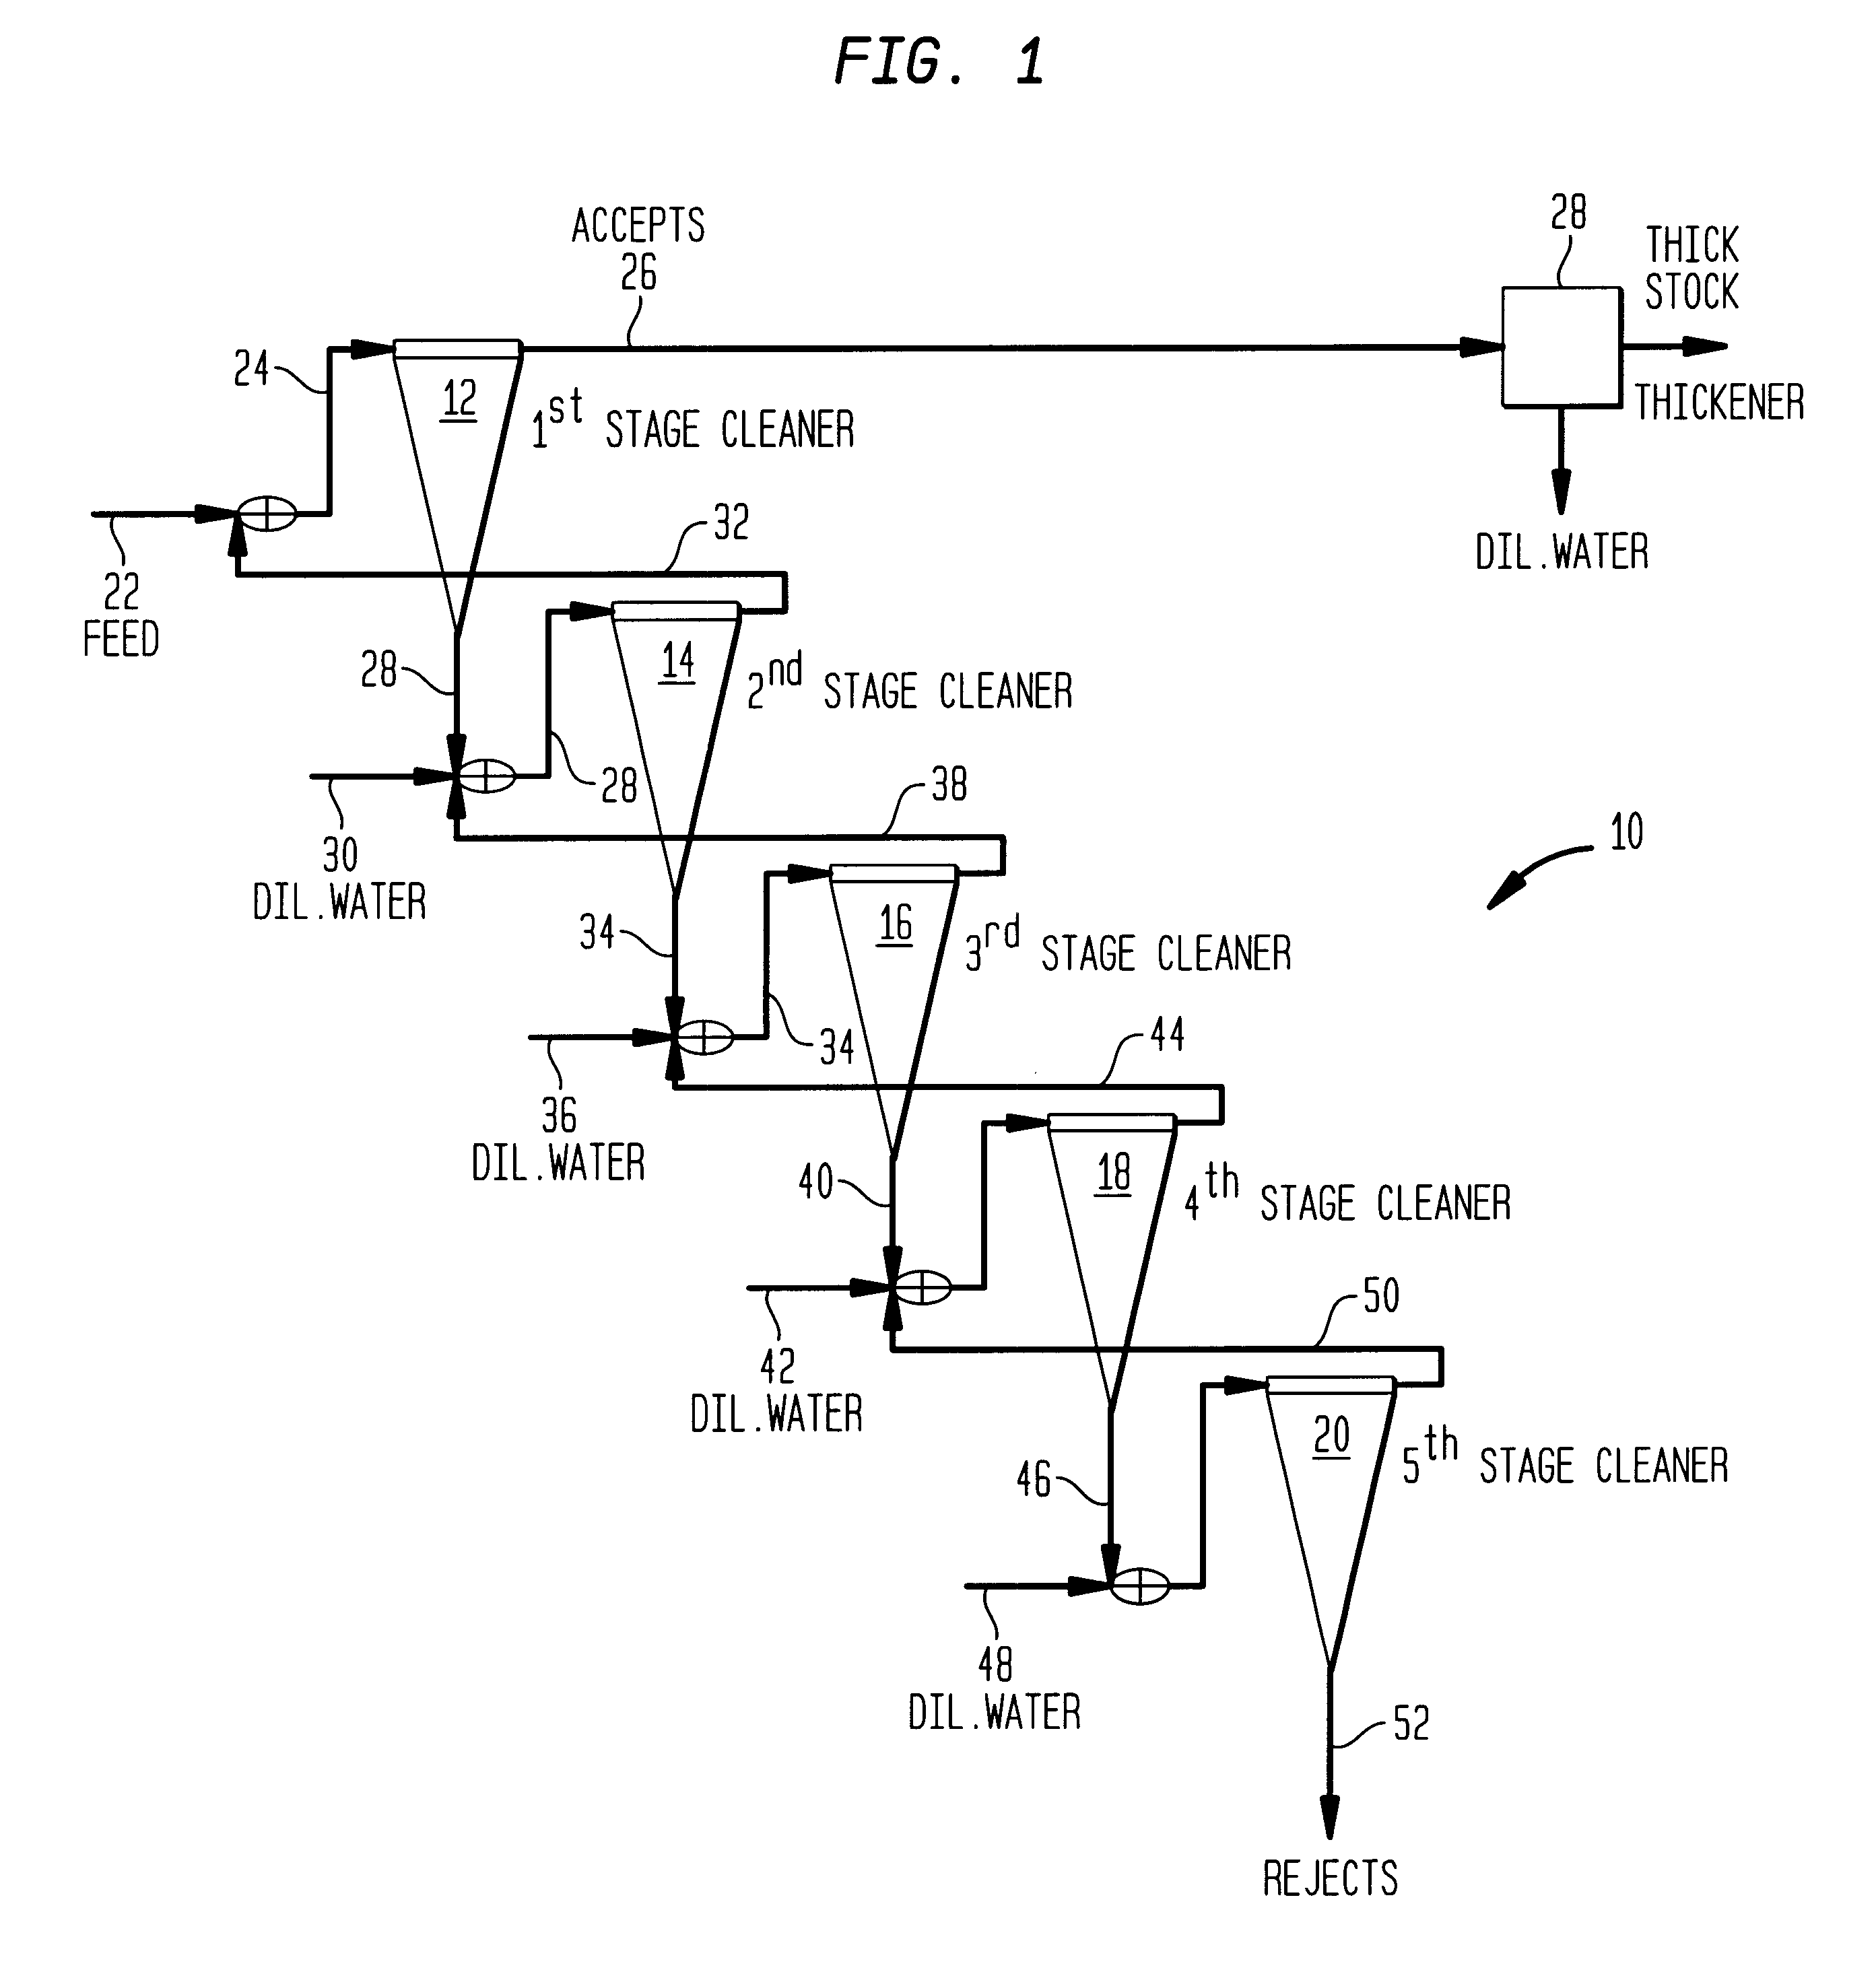 Hybrid multistage forward cleaner system with flotation cell